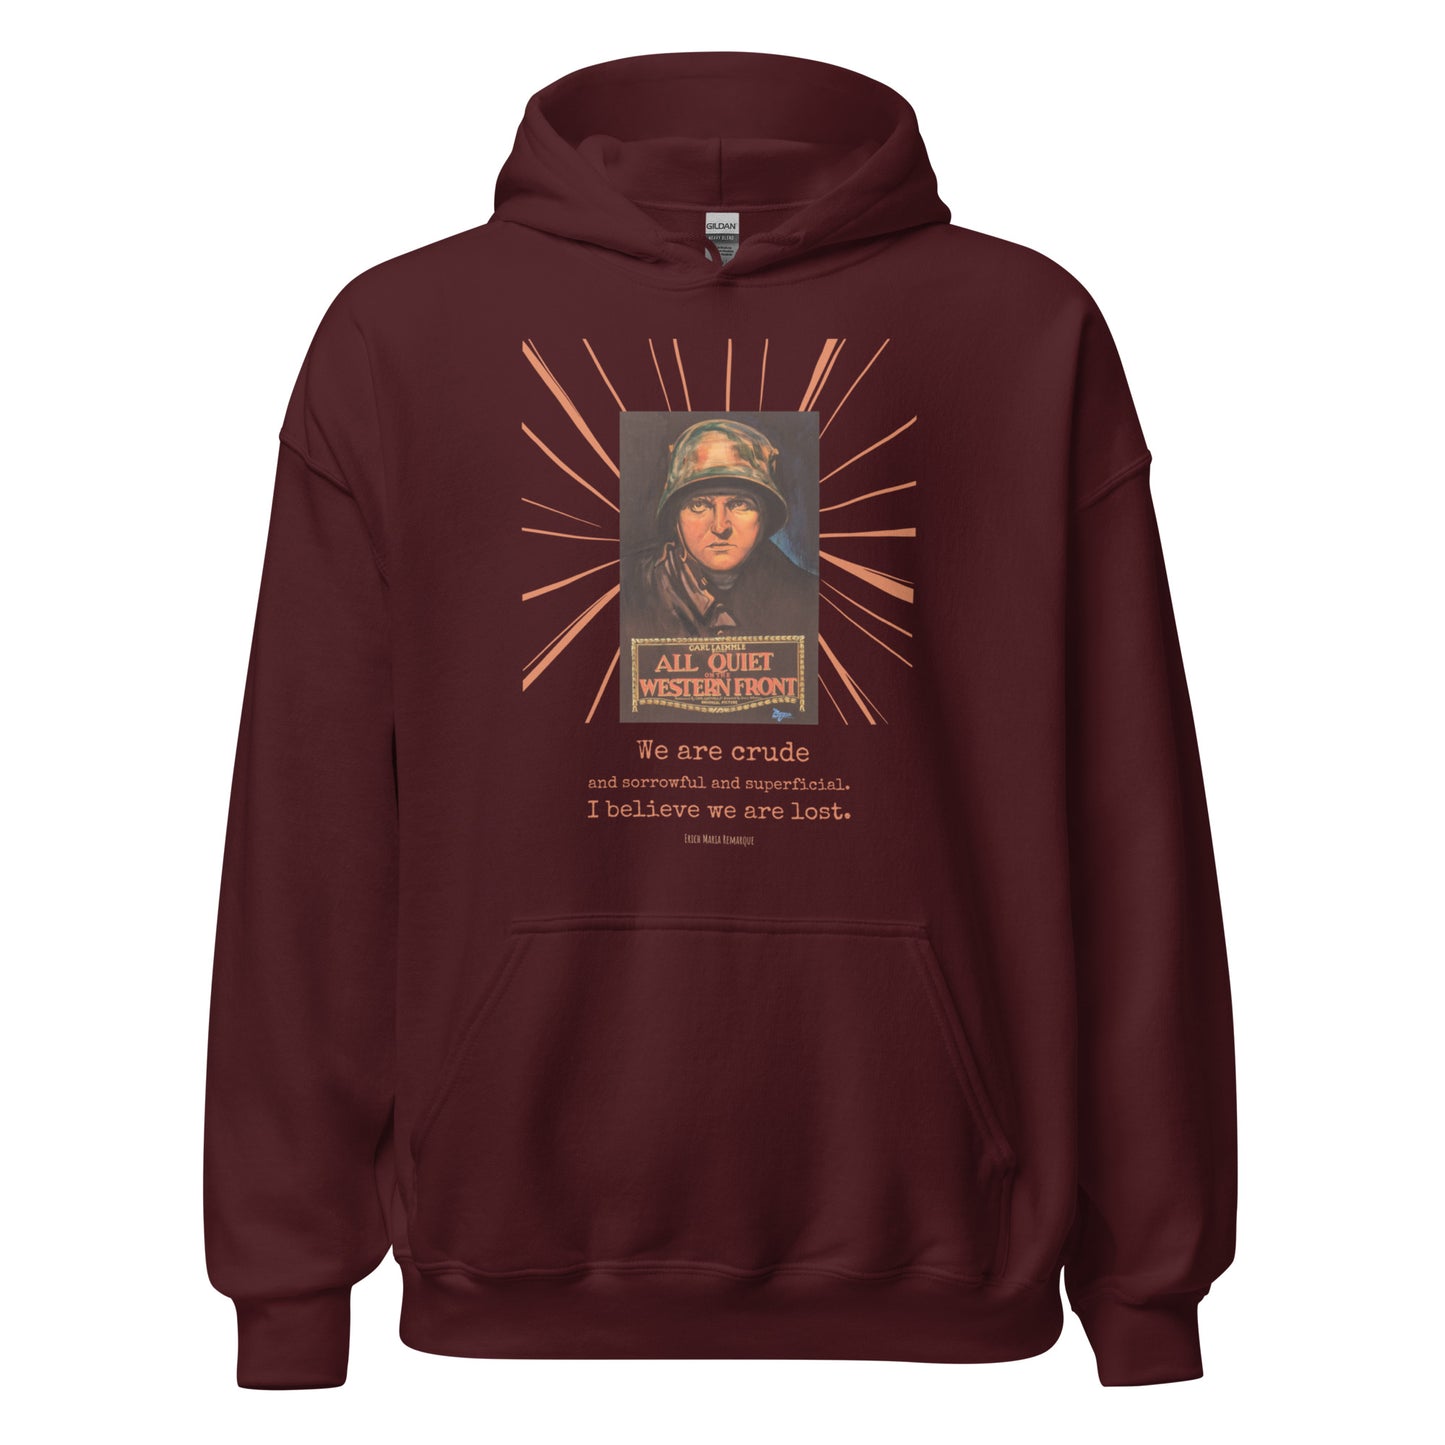 All Quiet on the Western Front Unisex Hoodie, 1930 Movie Poster, Erich Maria Remarque Quote